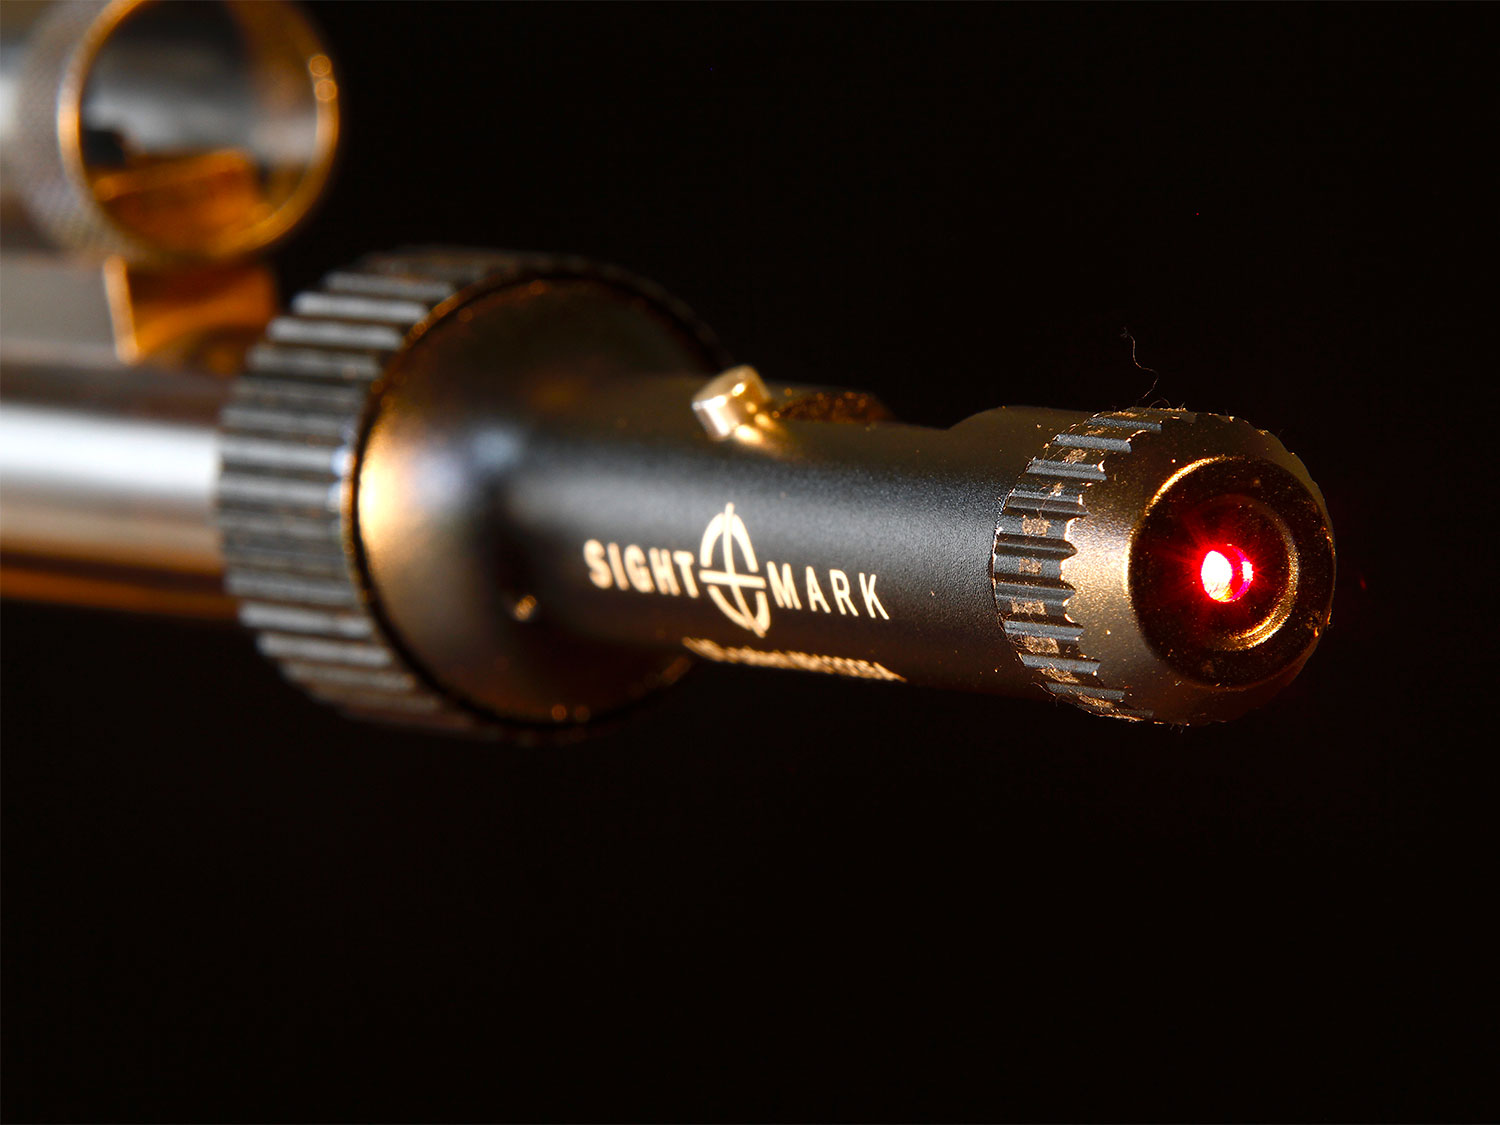 Close up details of a Sight Mark laser bore sight